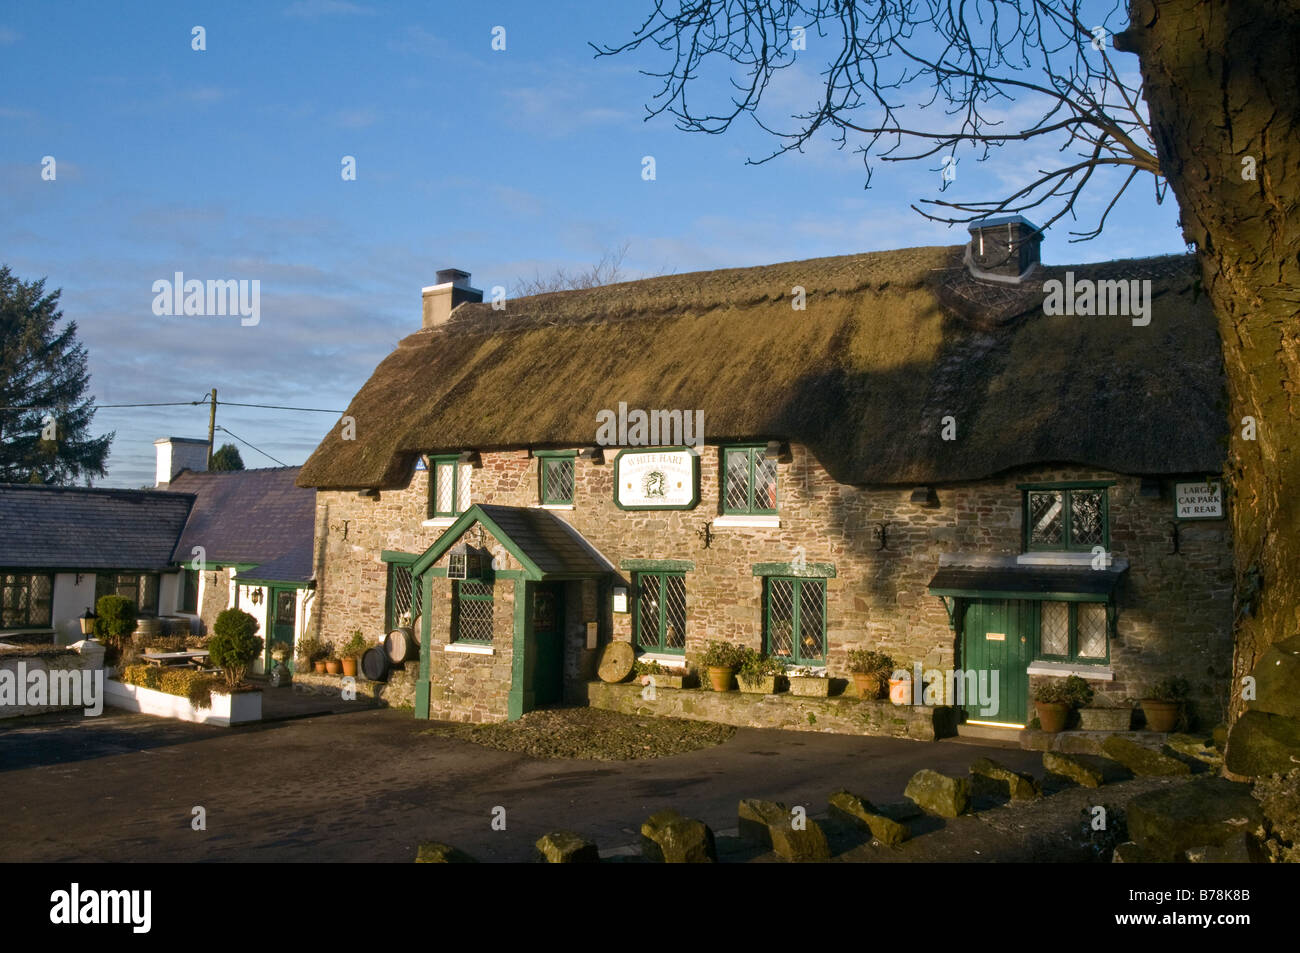 The White Hart Inn Llanddarog a thatched stone built pub in a small village in rural Carmarthenshire, Wales Stock Photo